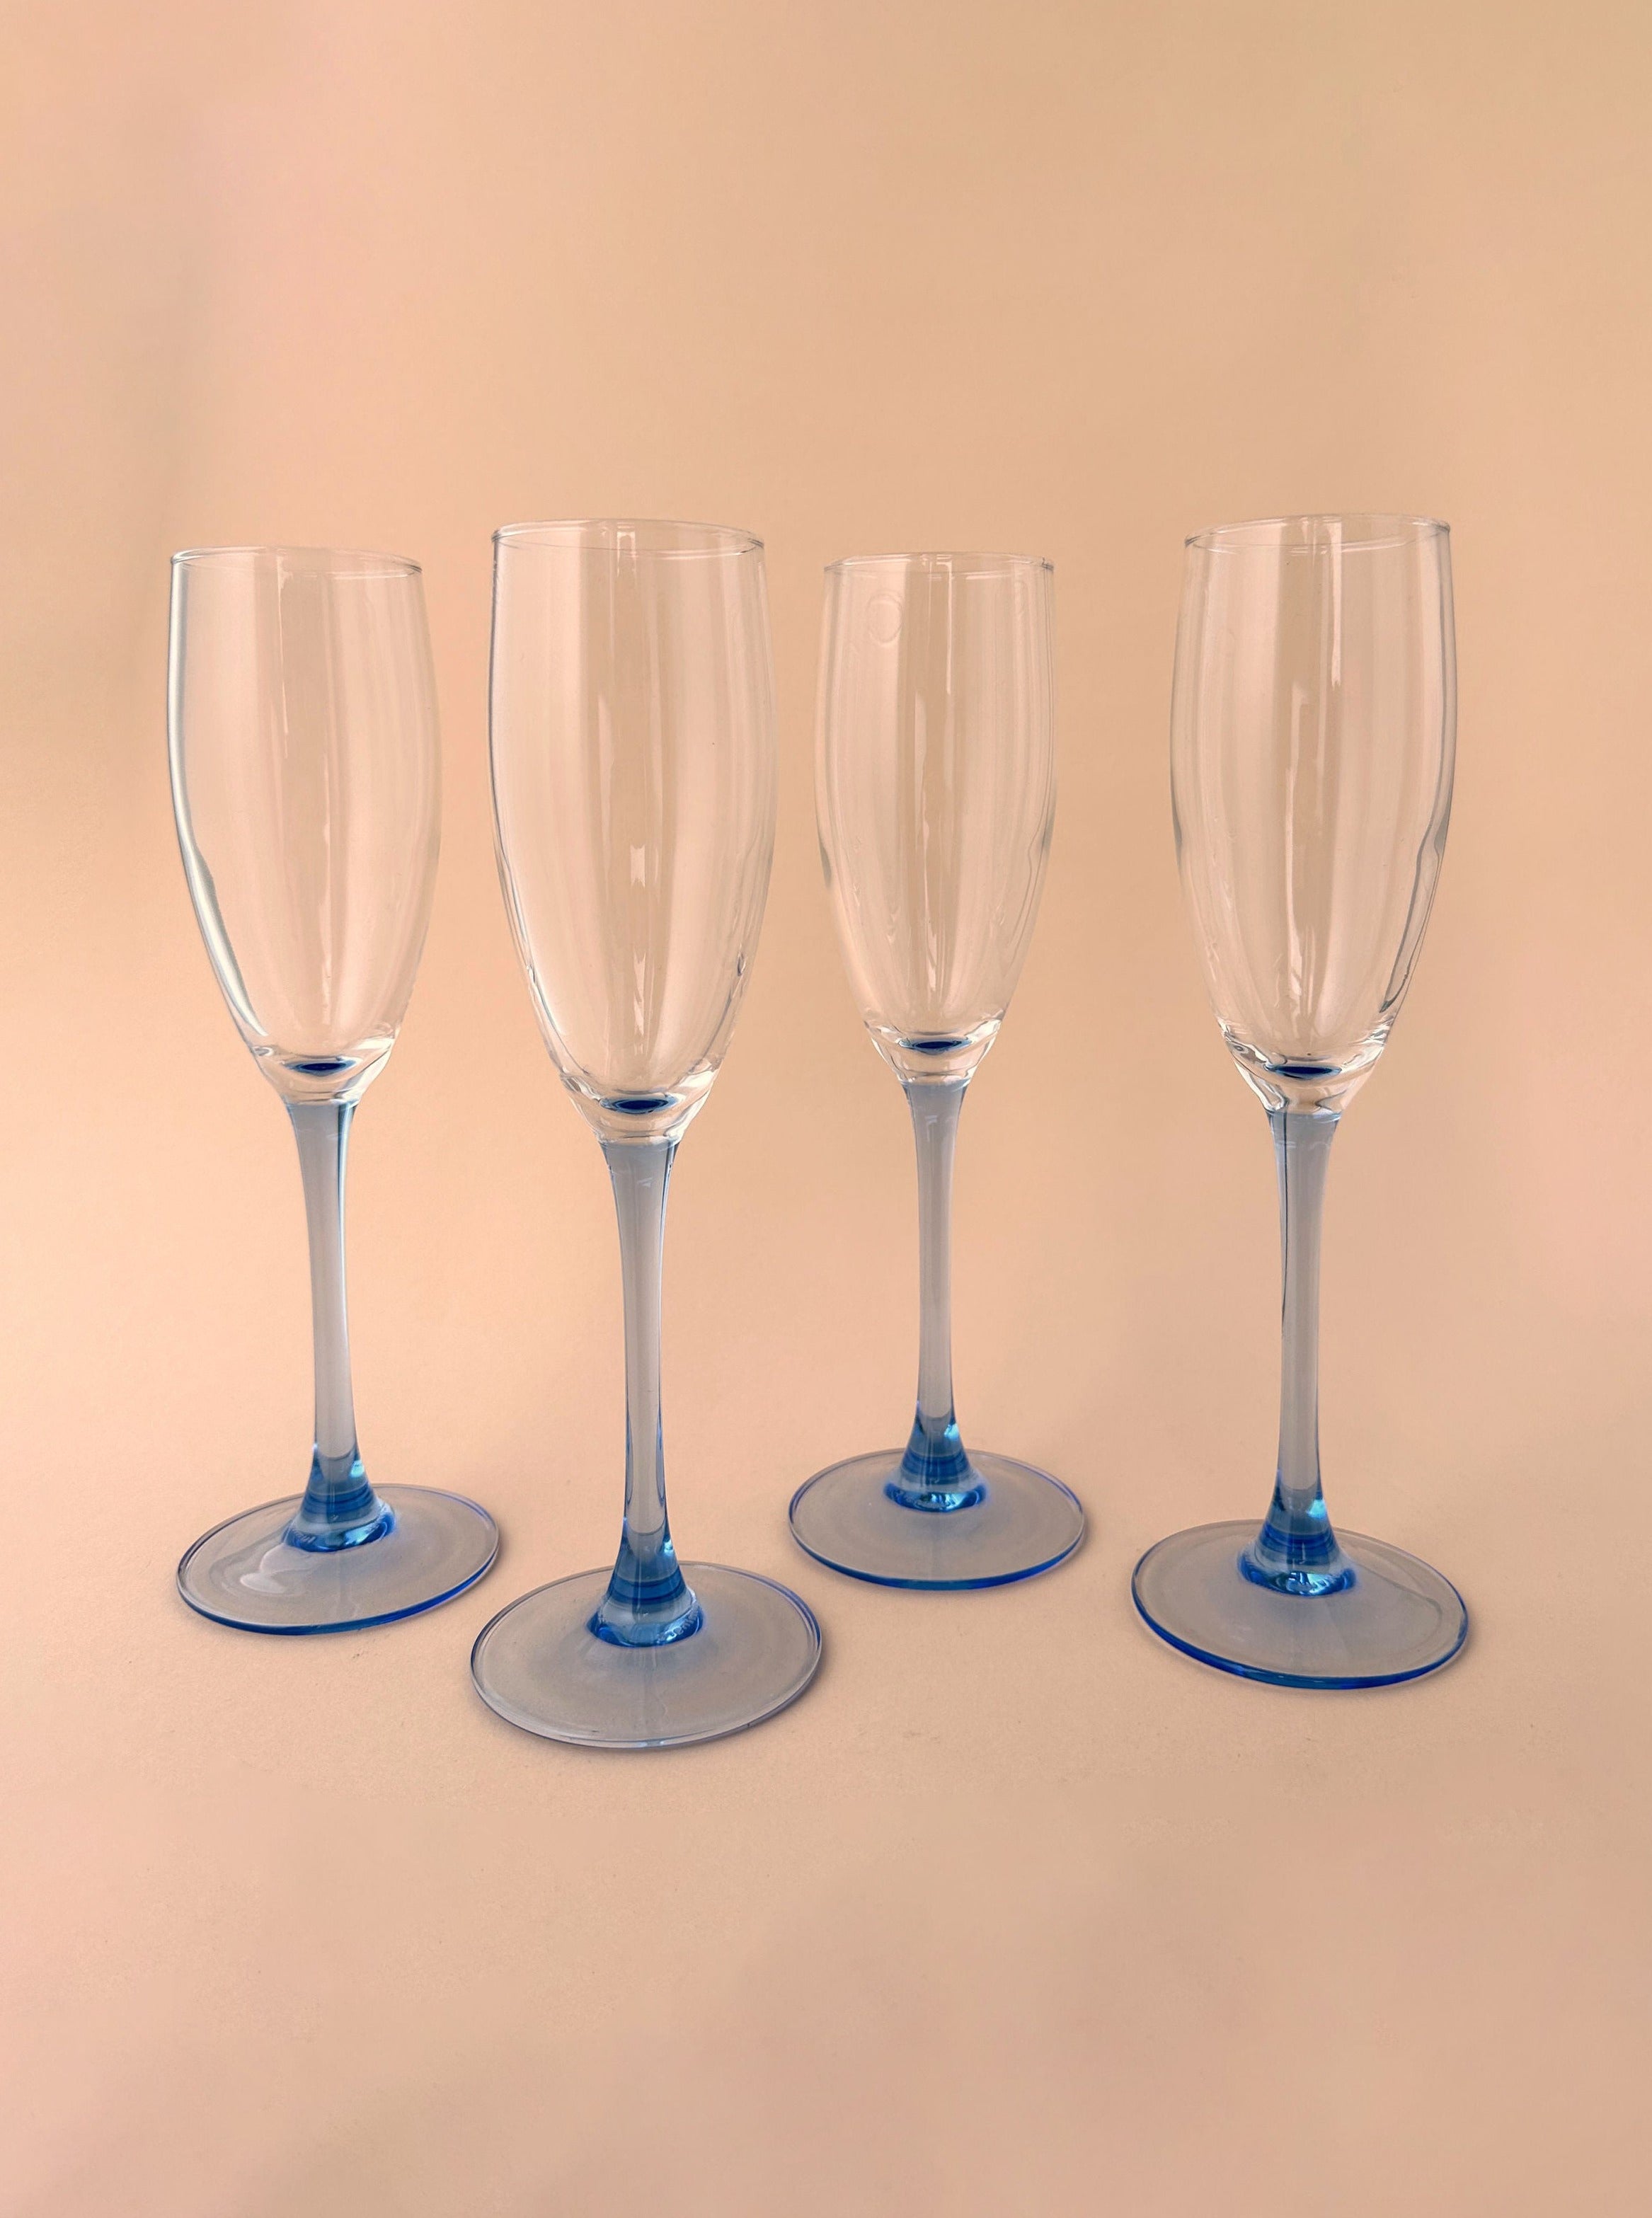 Modern Drinking Glass: Flute, Champagne Coupe, Wine & Water